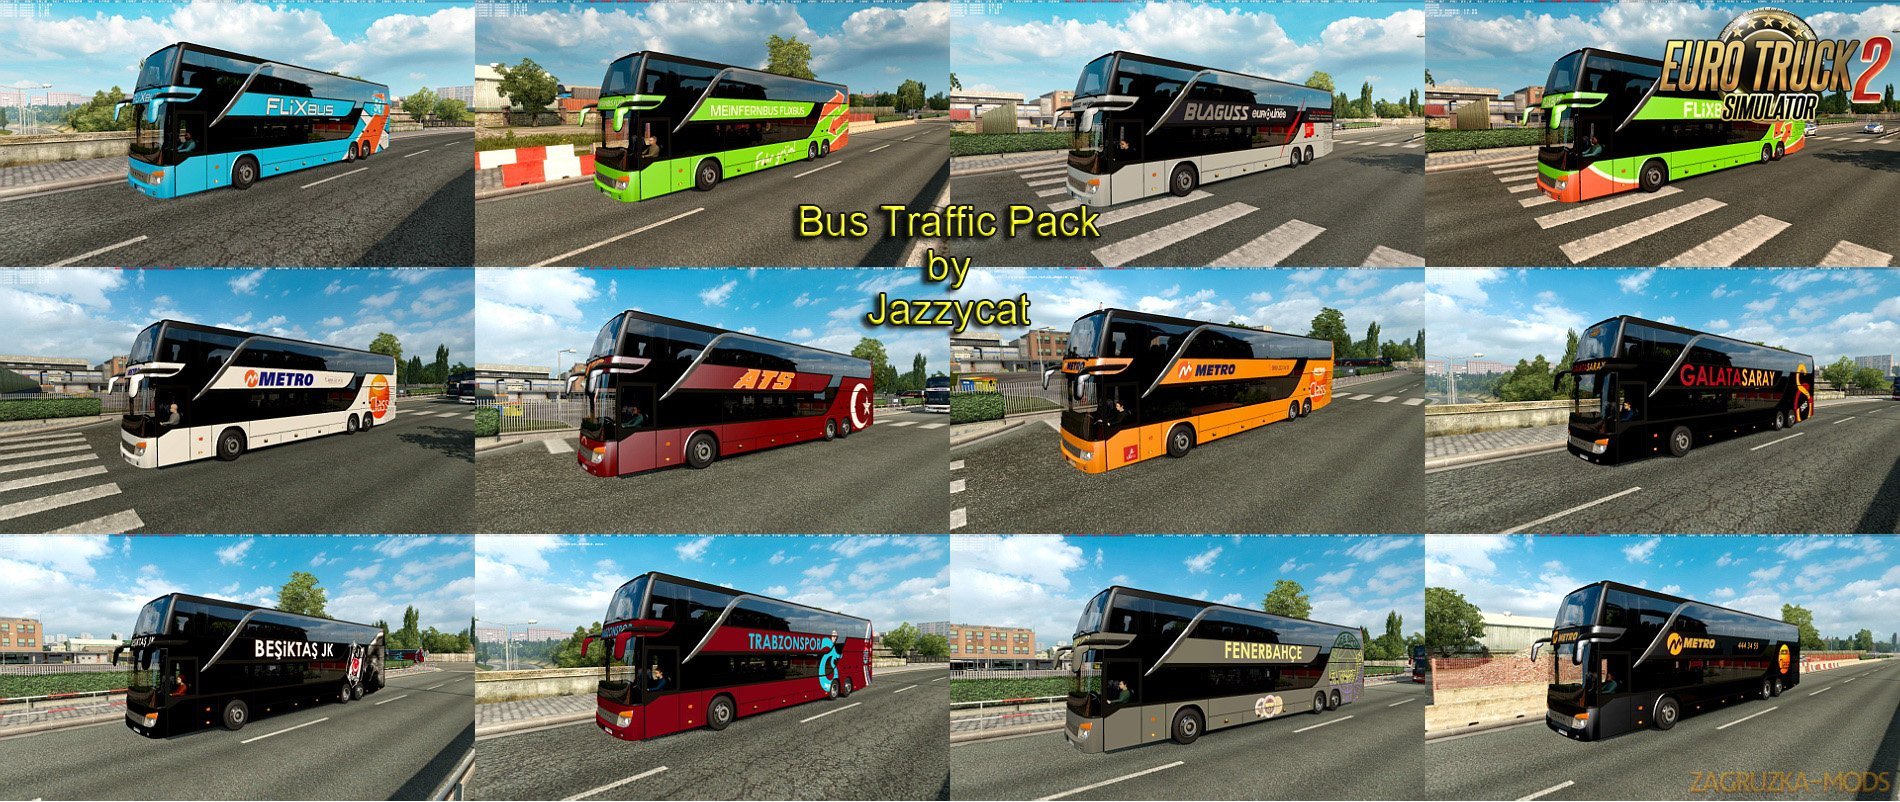 Bus Traffic Pack v2.8 by Jazzycat